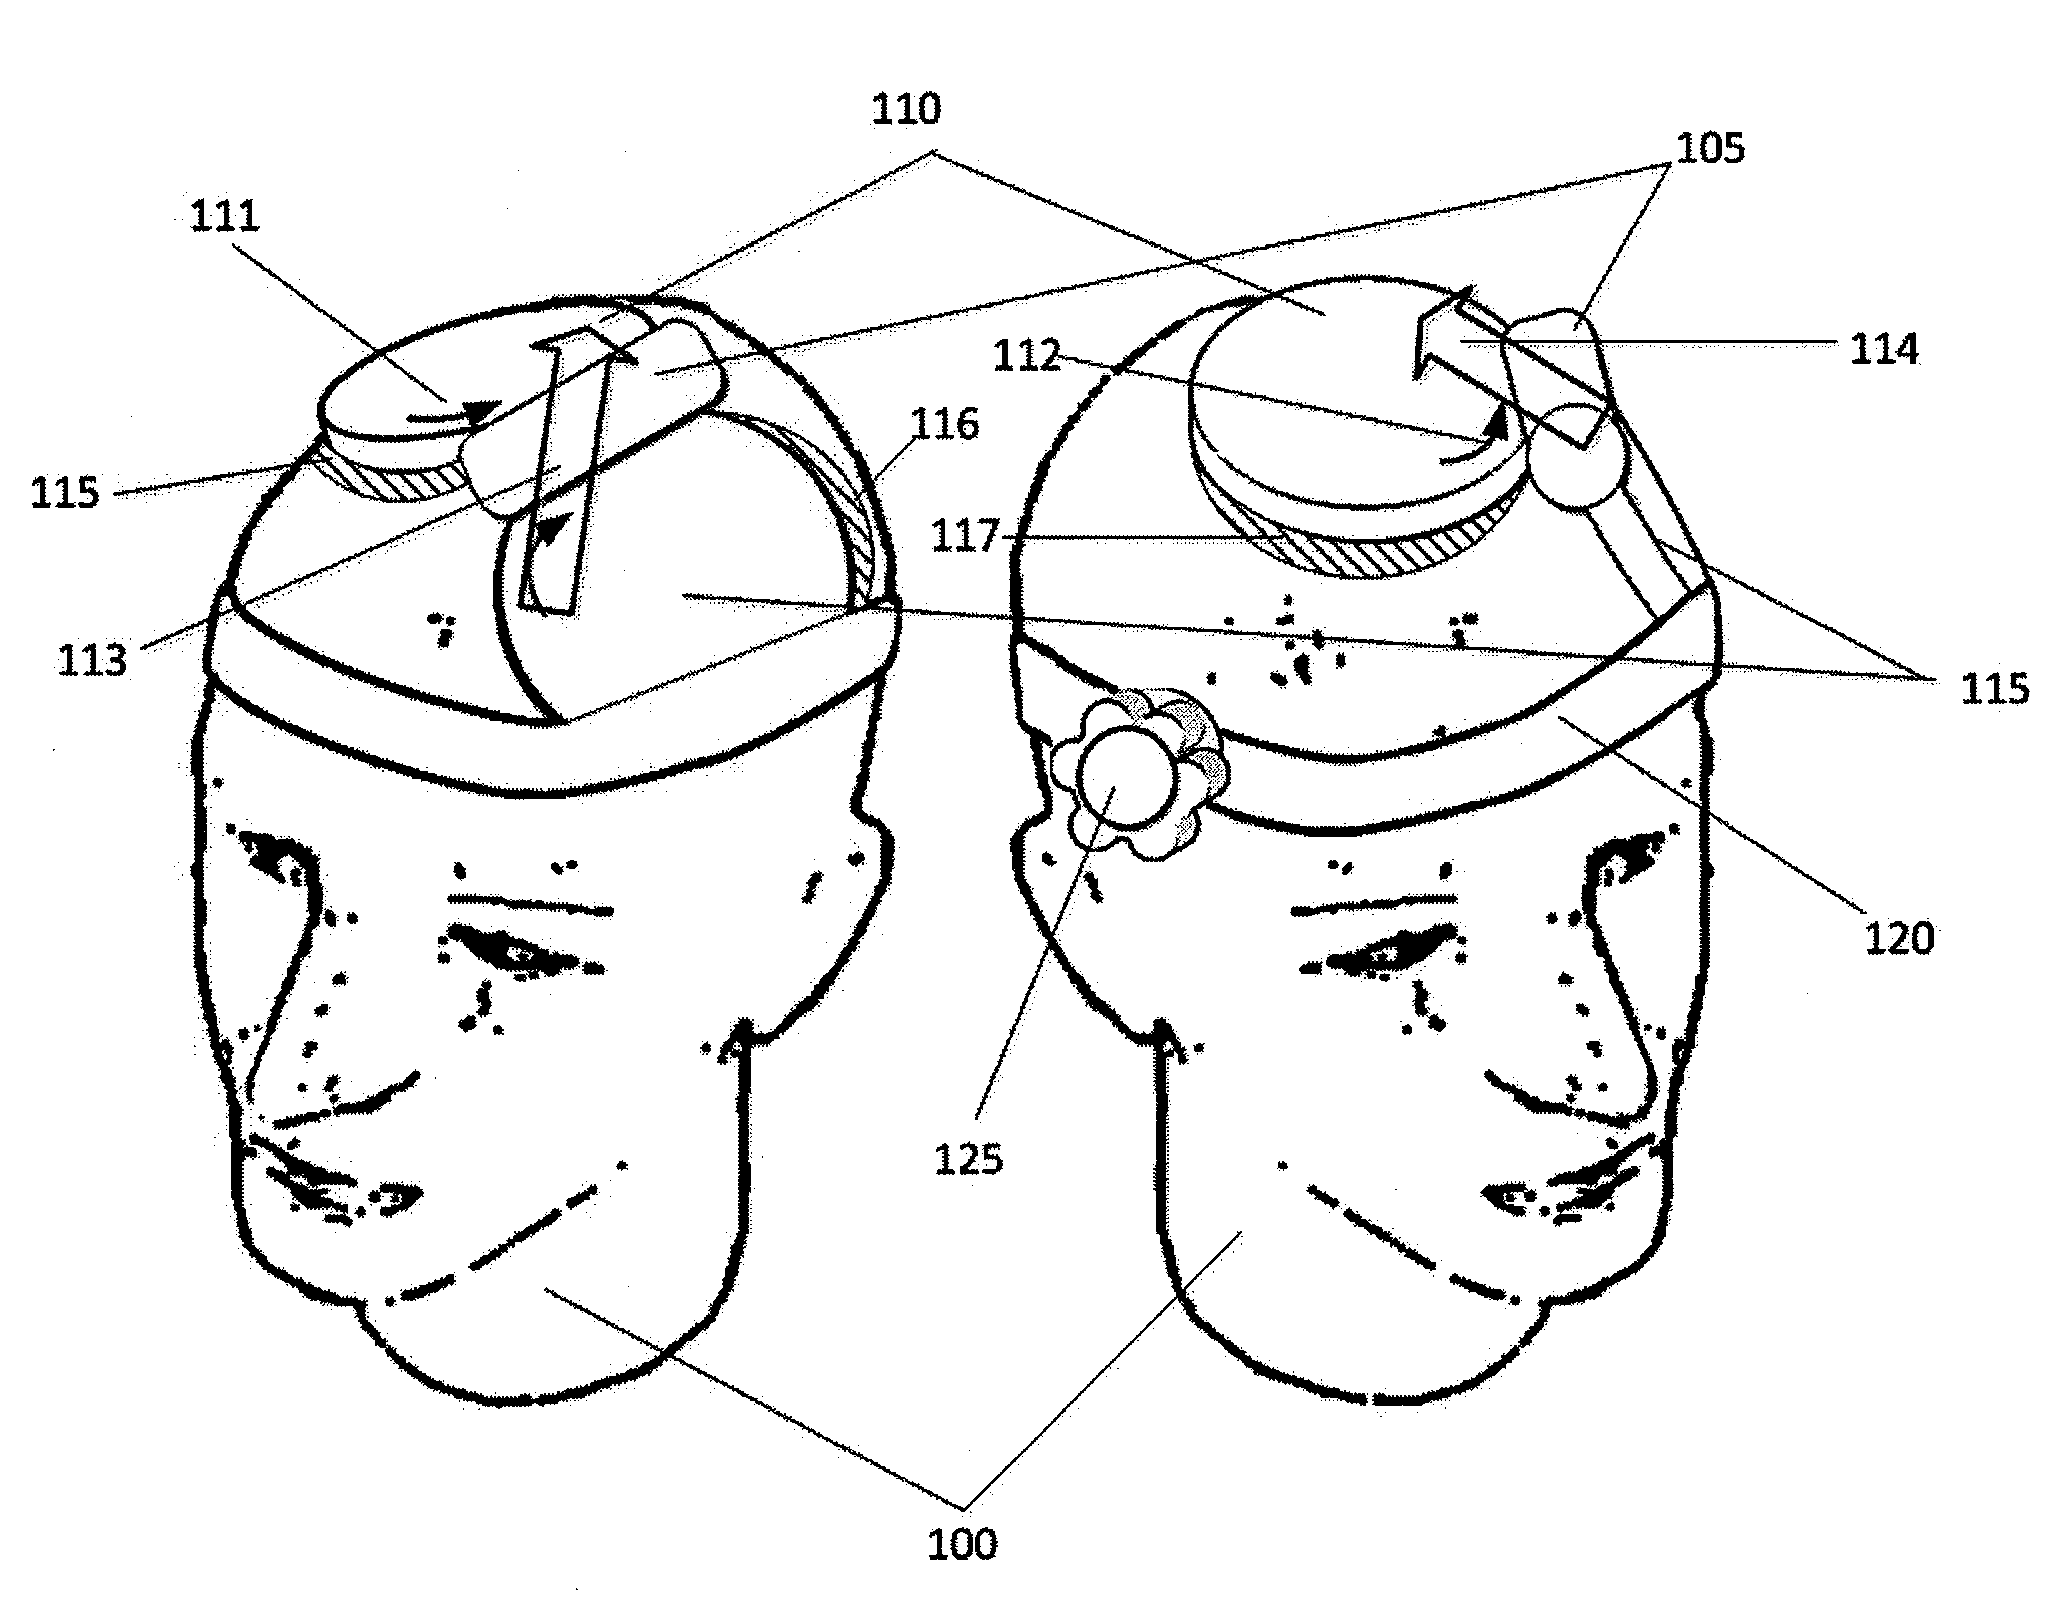 Hinged transcranial magnetic stimulation array for novel coil alignment